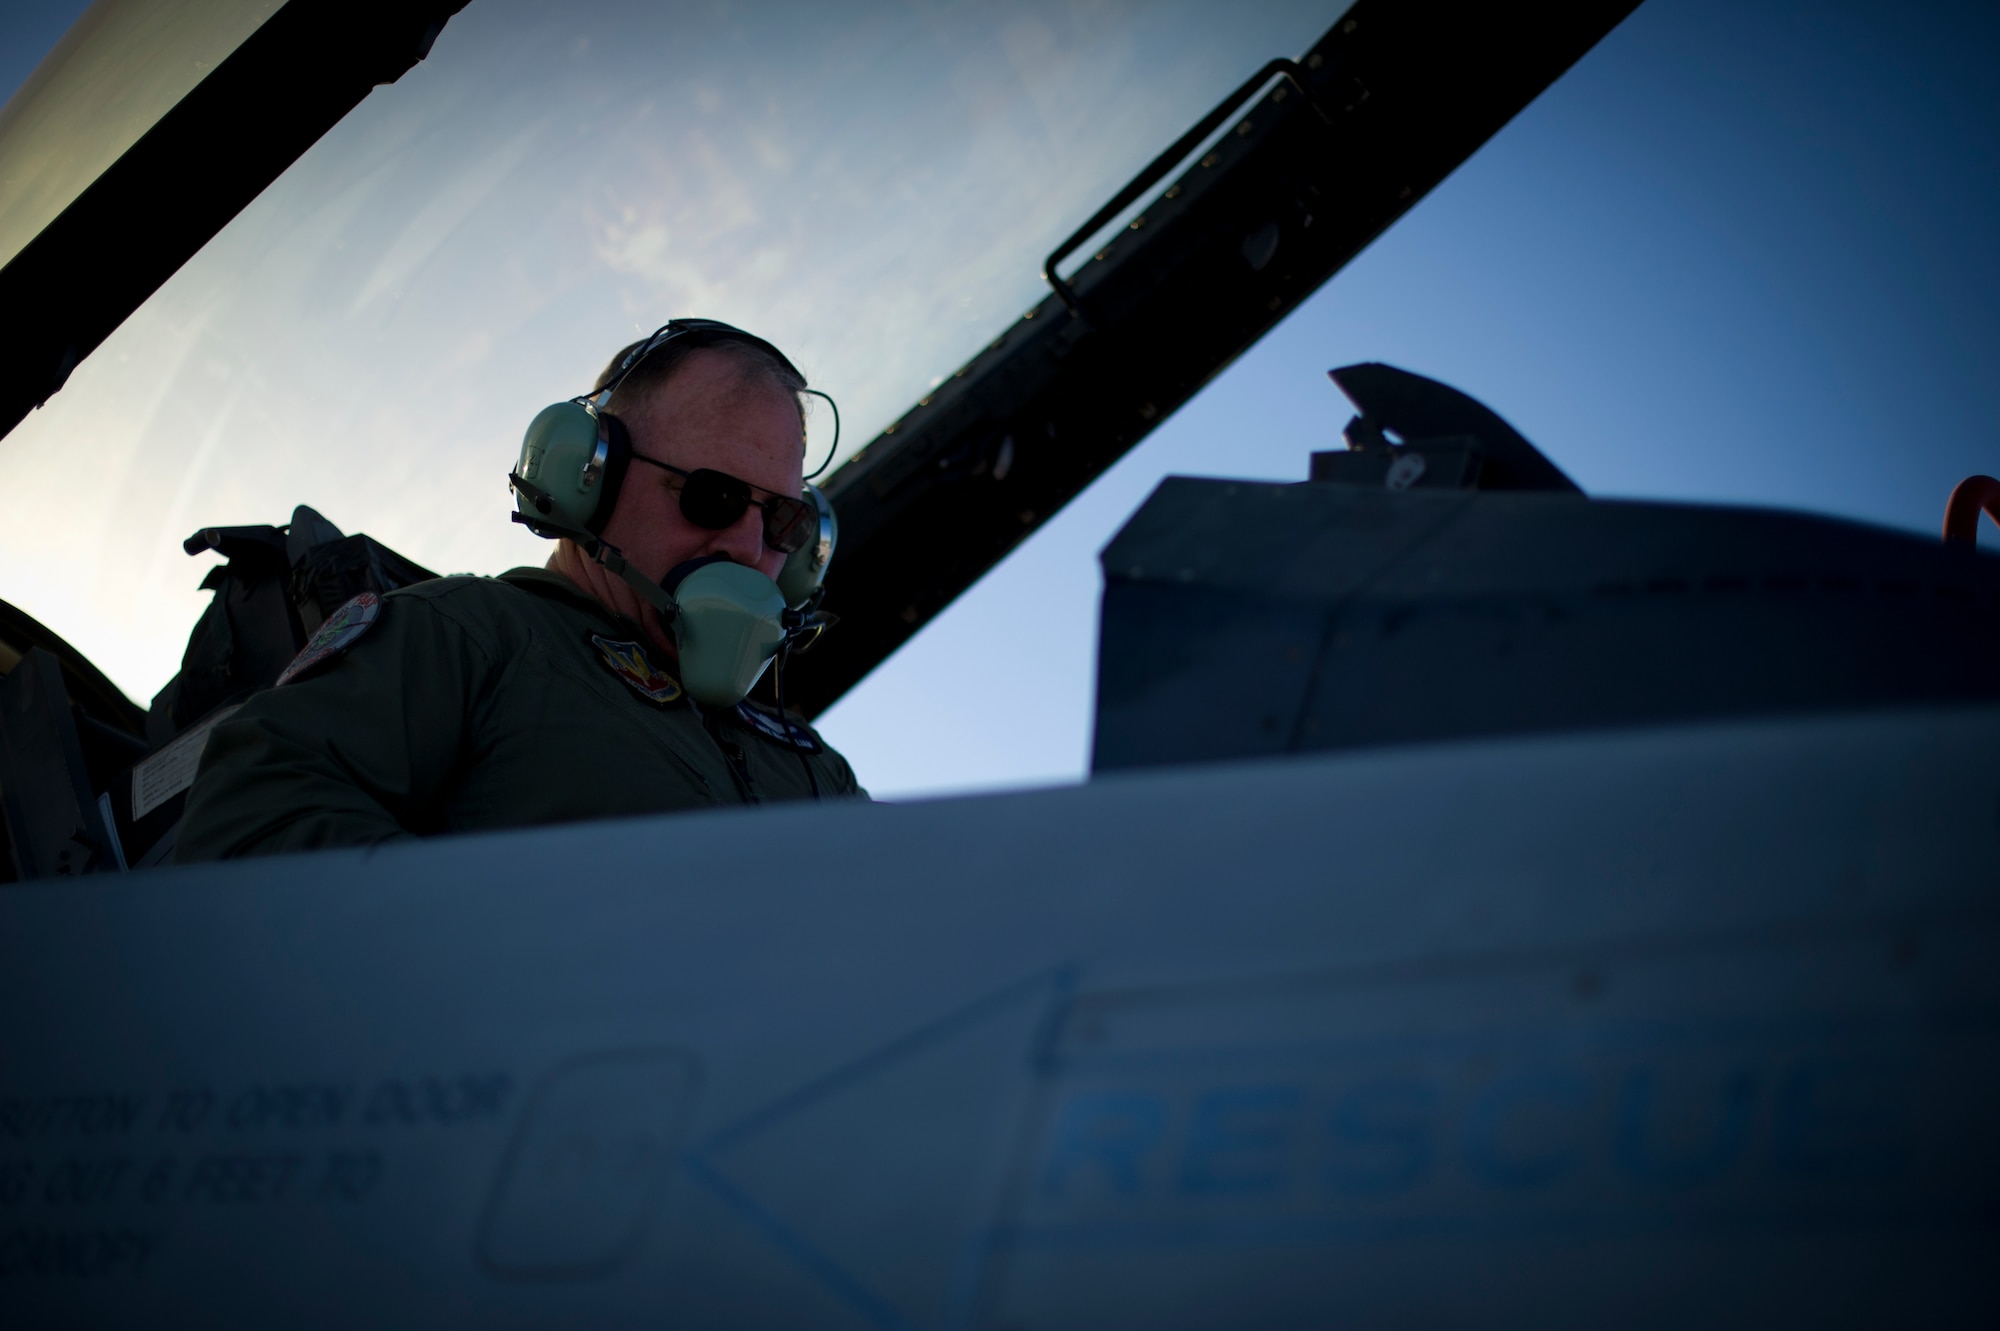 A QF-16 pilot prepares the aircraft for takeoff during an unmanned live fire exercise at Holloman Air Force Base, N.M., June 25. A QF-16 took part in an operational live fire exercise as part of the aircrafts test flight program before the beginning of production at the Boeing facility in Cecil Field, Jacksonville, Fla. in late 2014. (U.S. Air Force photo by Airman 1st Class Aaron Montoya / Released)